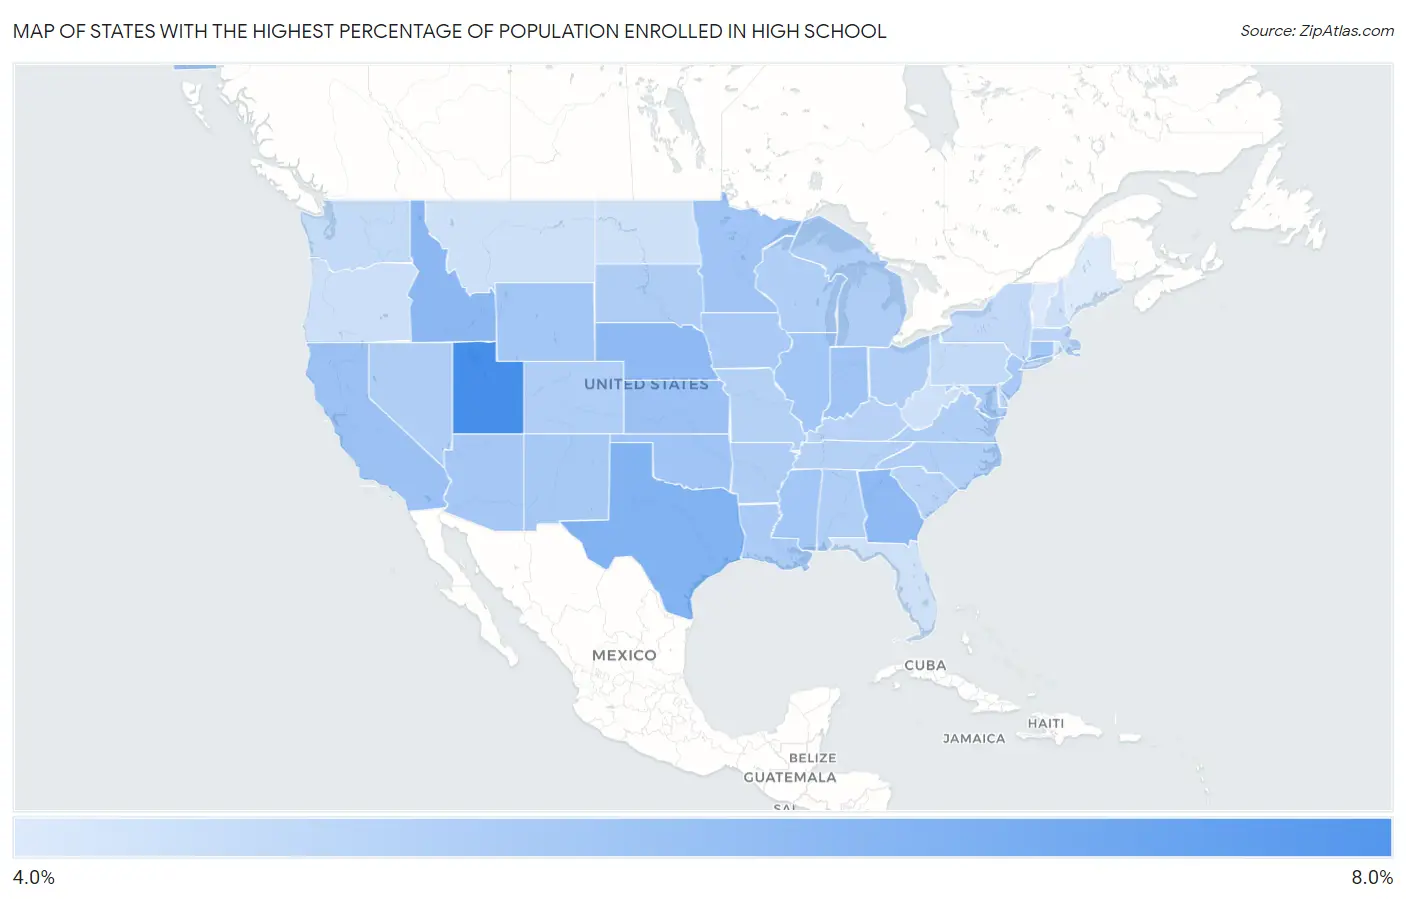 States with the Highest Percentage of Population Enrolled in High School in the United States Map